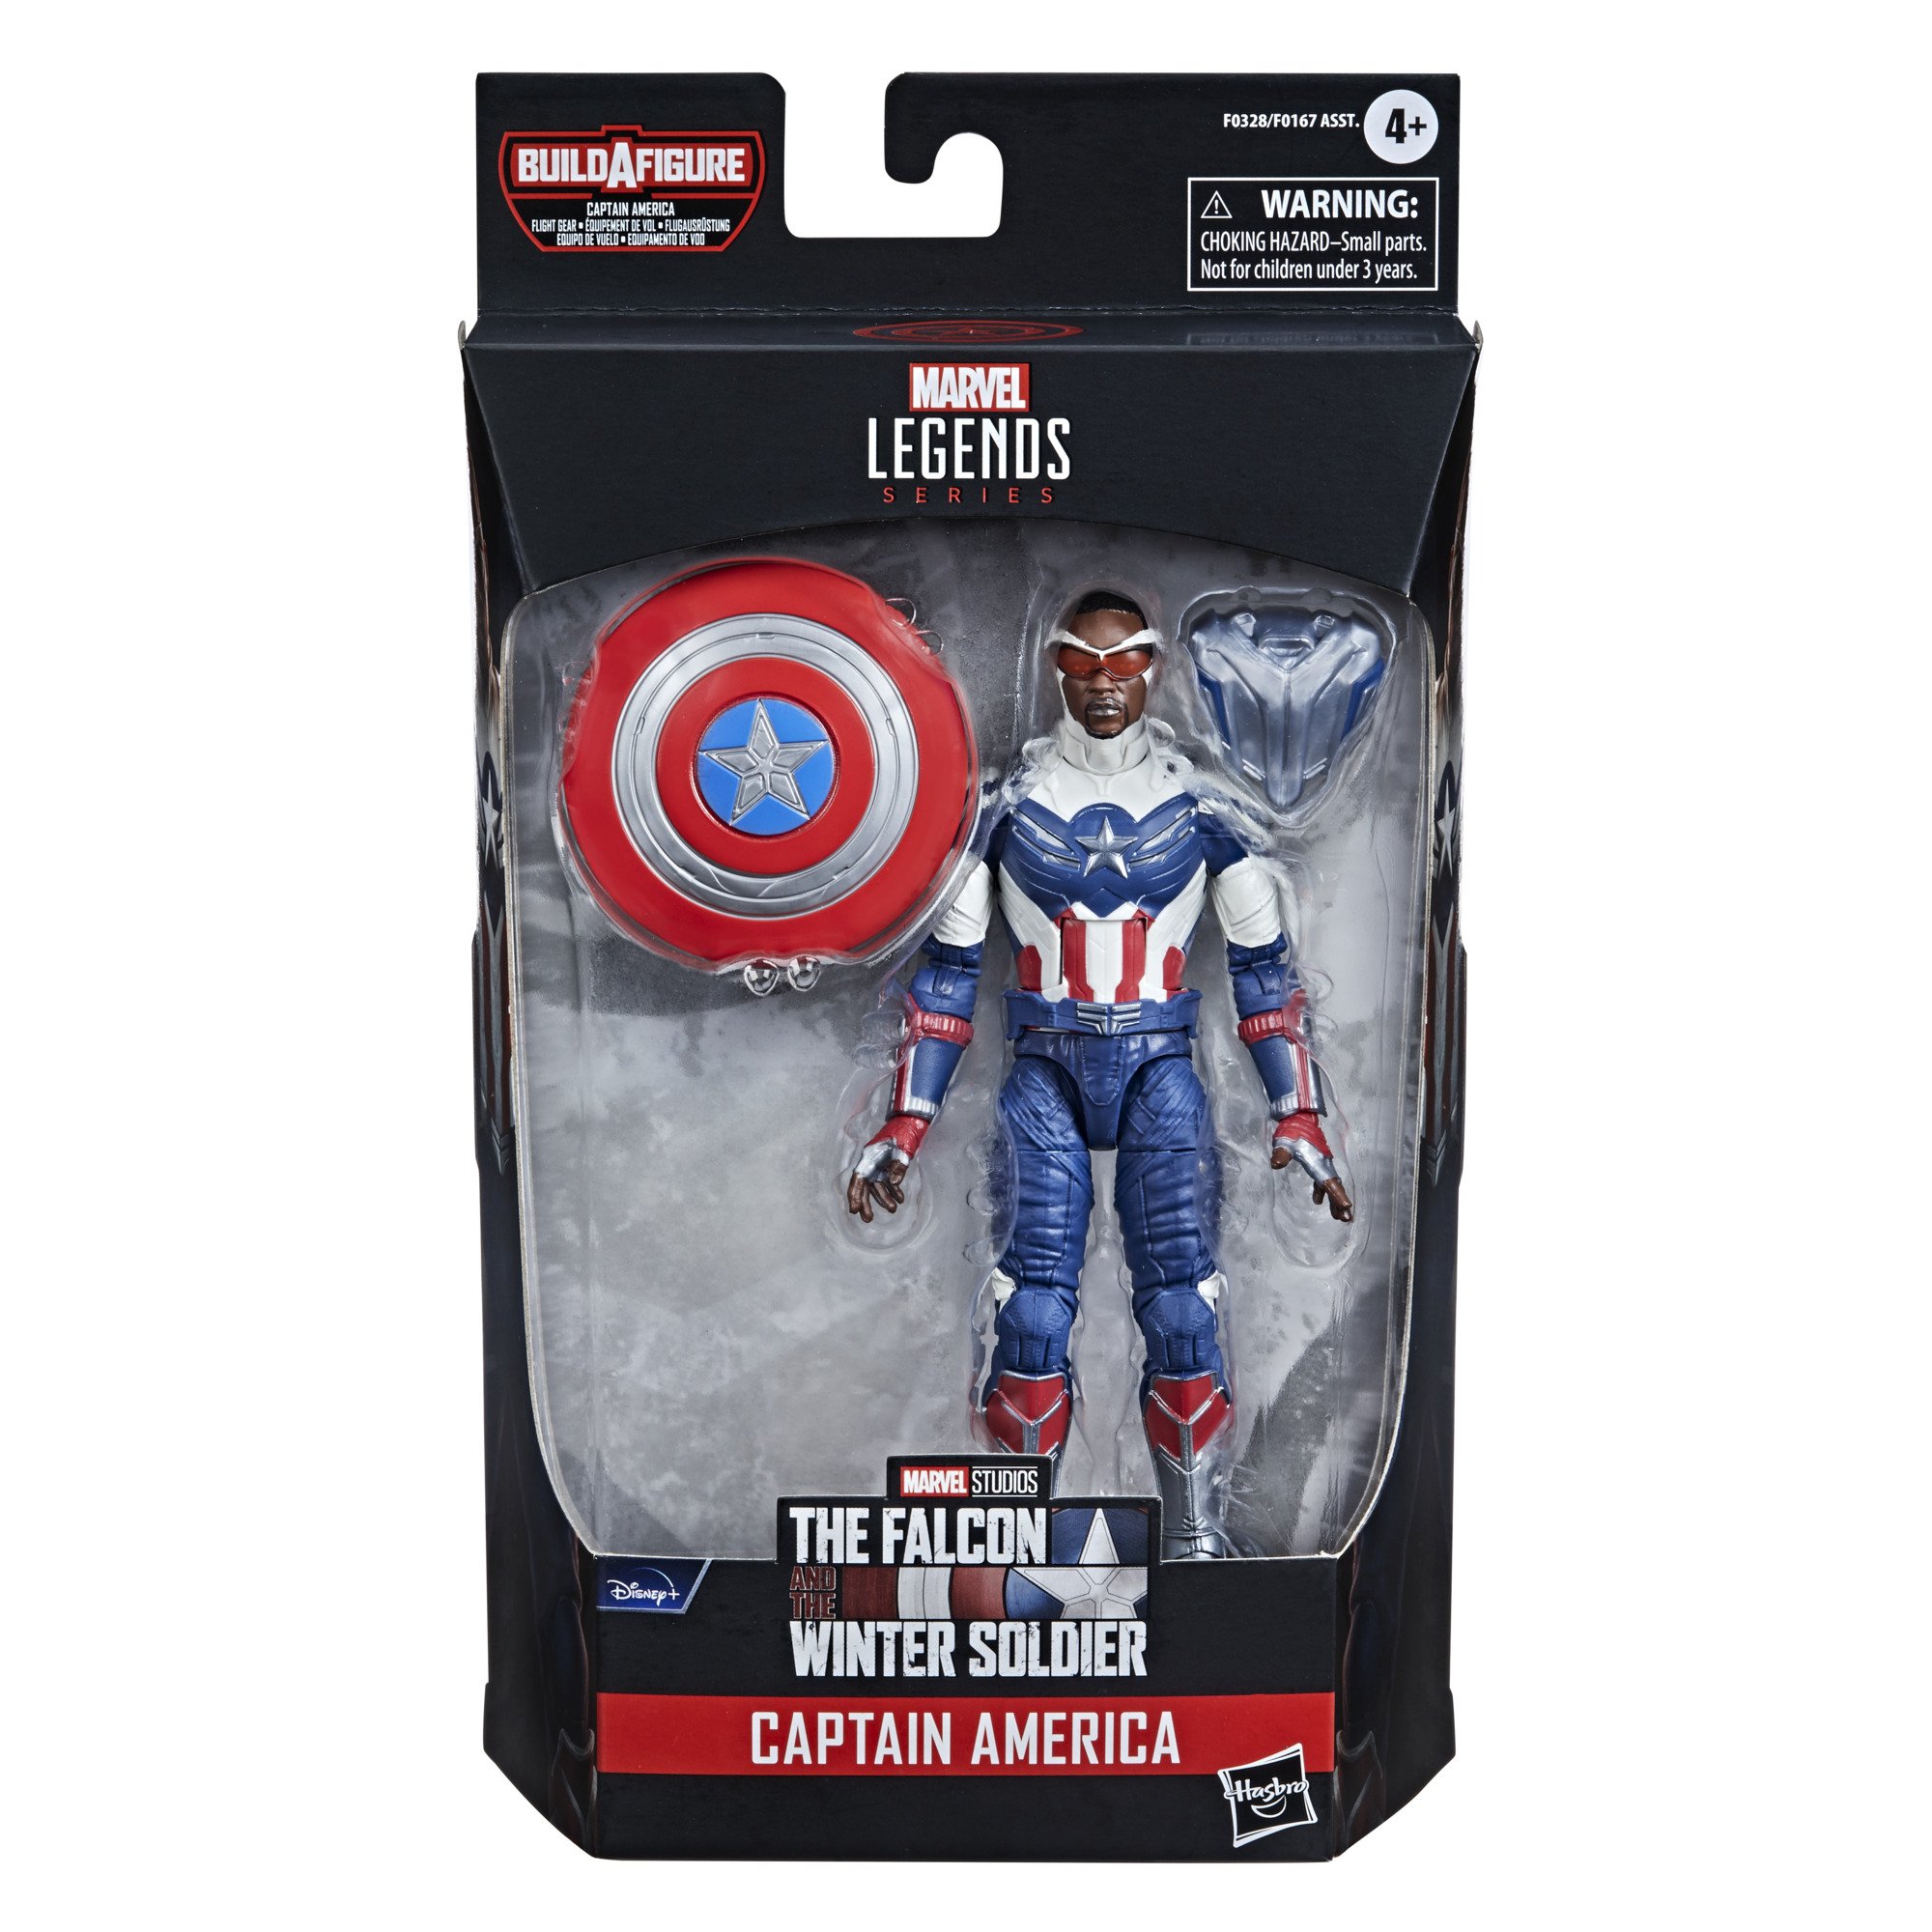 Captain America packaged